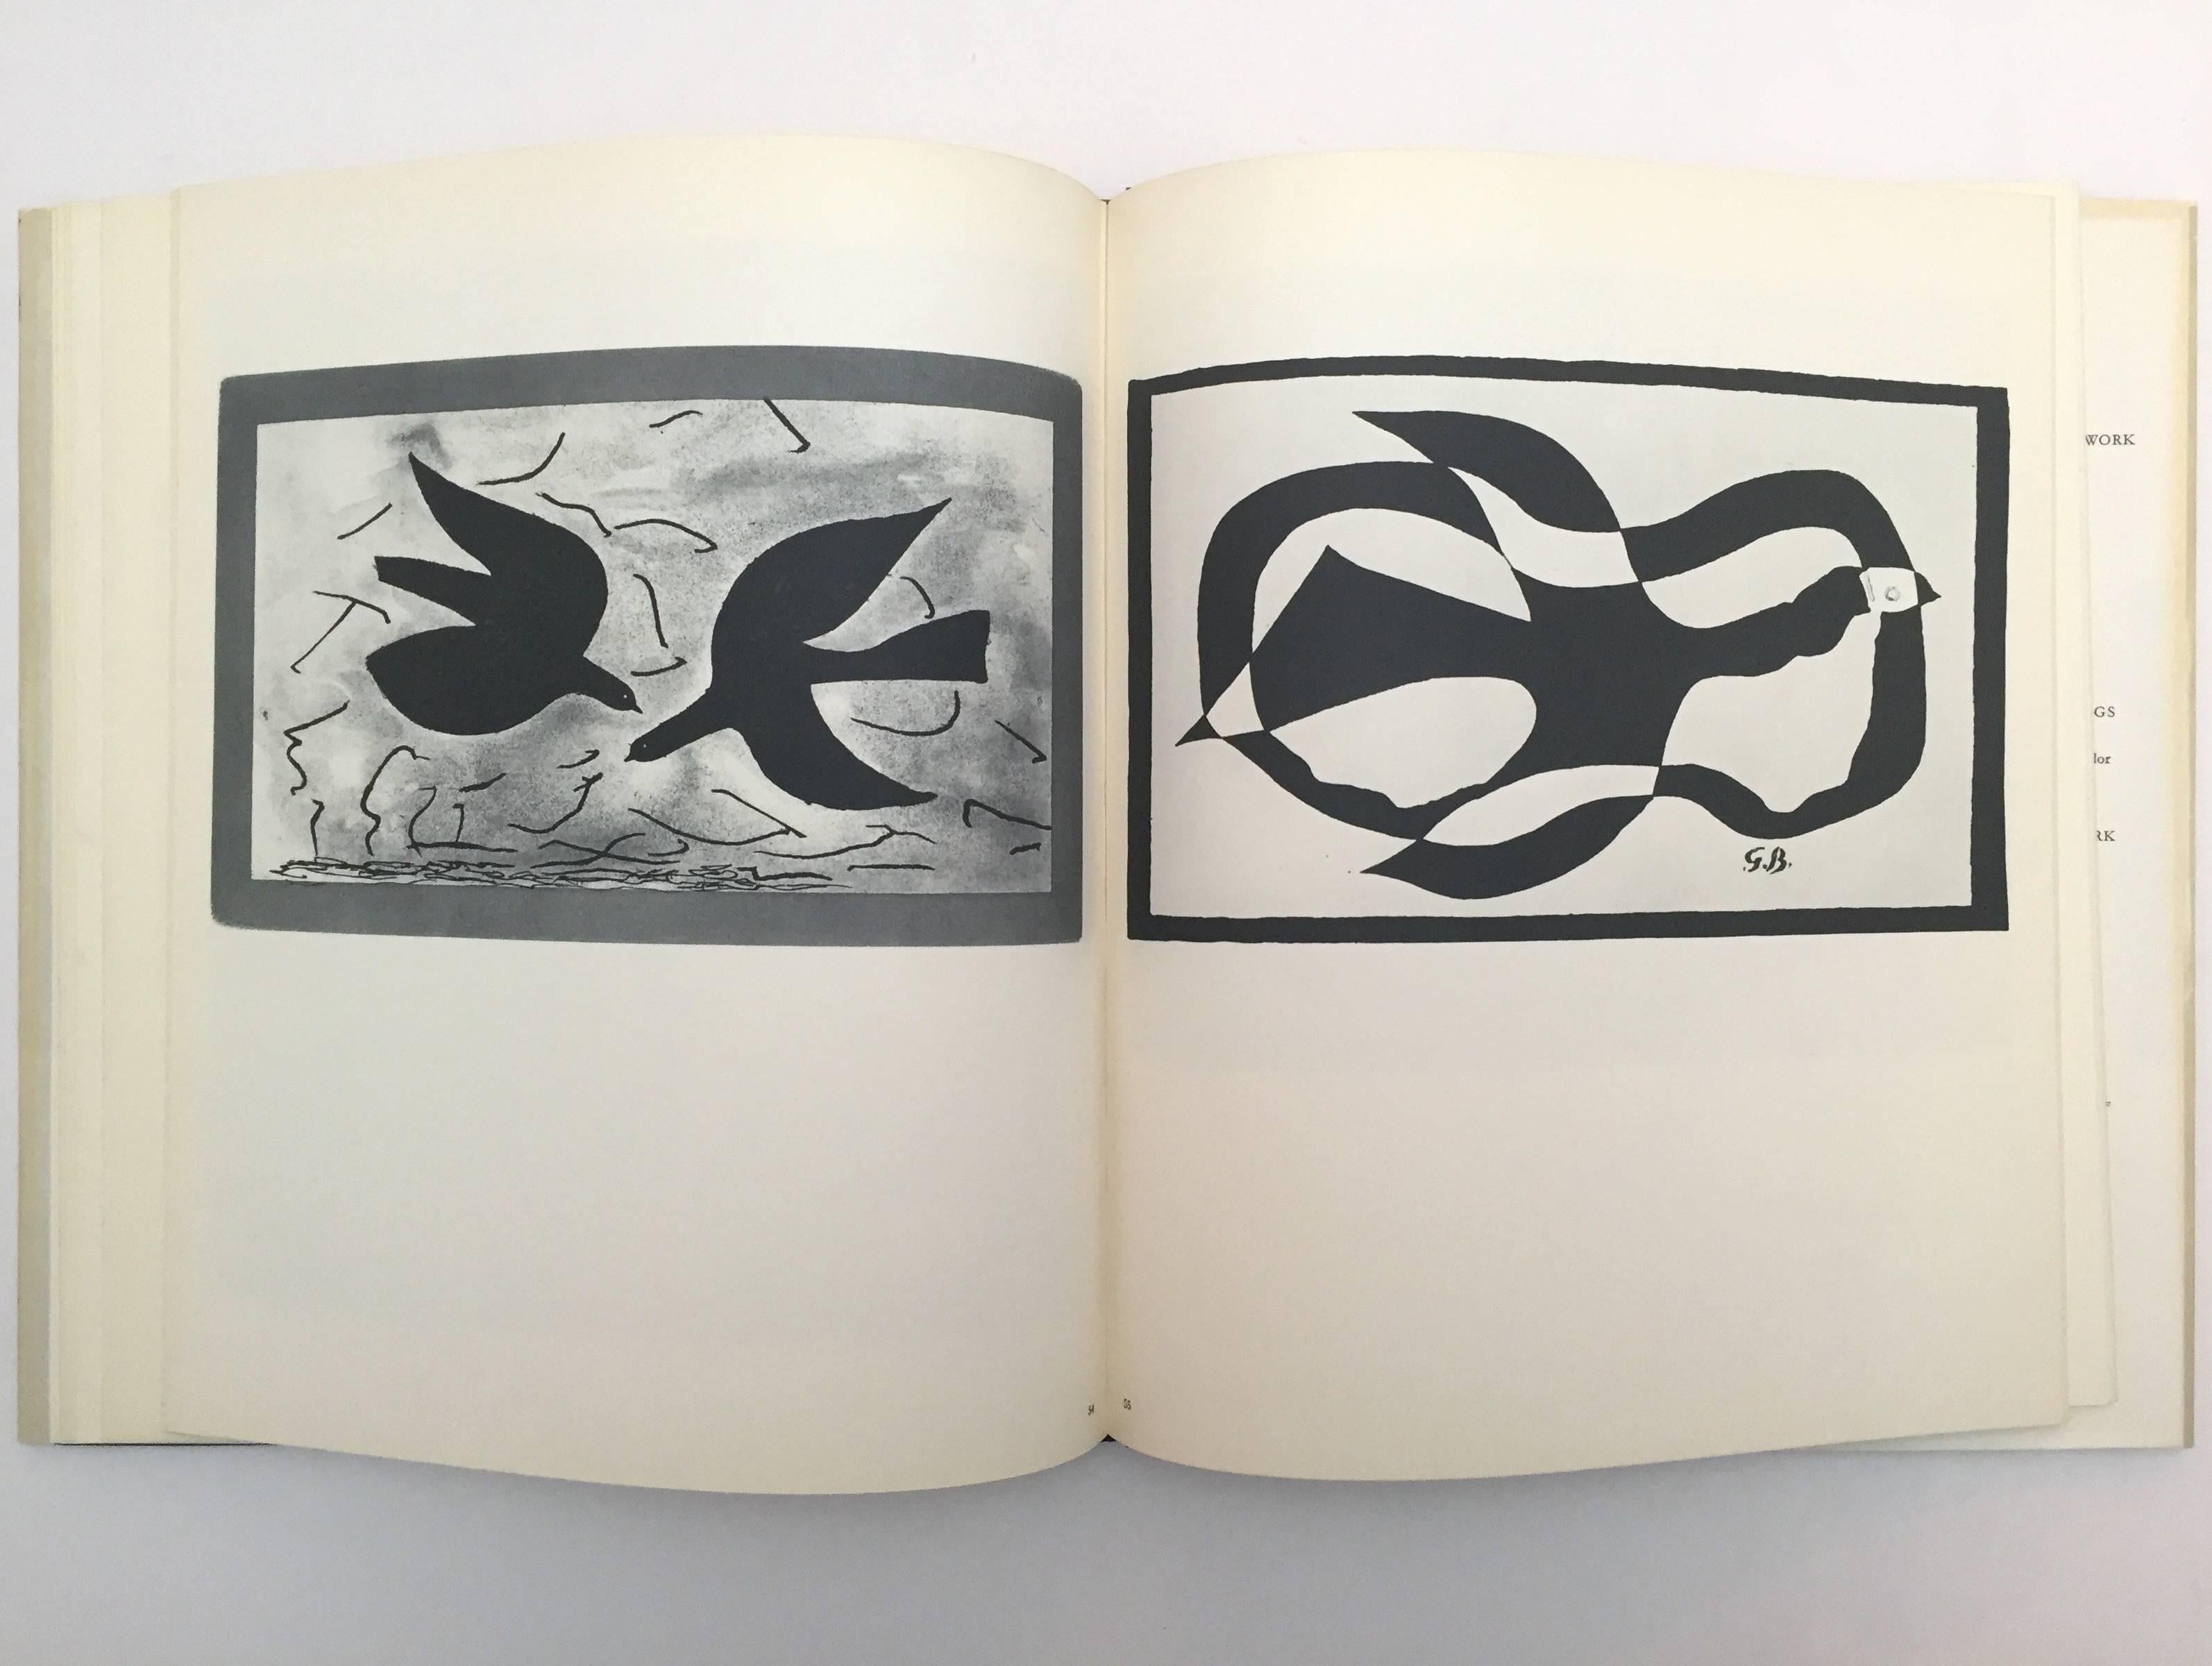 Published in 1961 by Harry N.Abrams Inc., New York.

Throughout Braque's career he has produced a countless number of graphic works; this monograph presents his works in an unprecedented fashion with over 170 illustrations. Werner Hoffman's